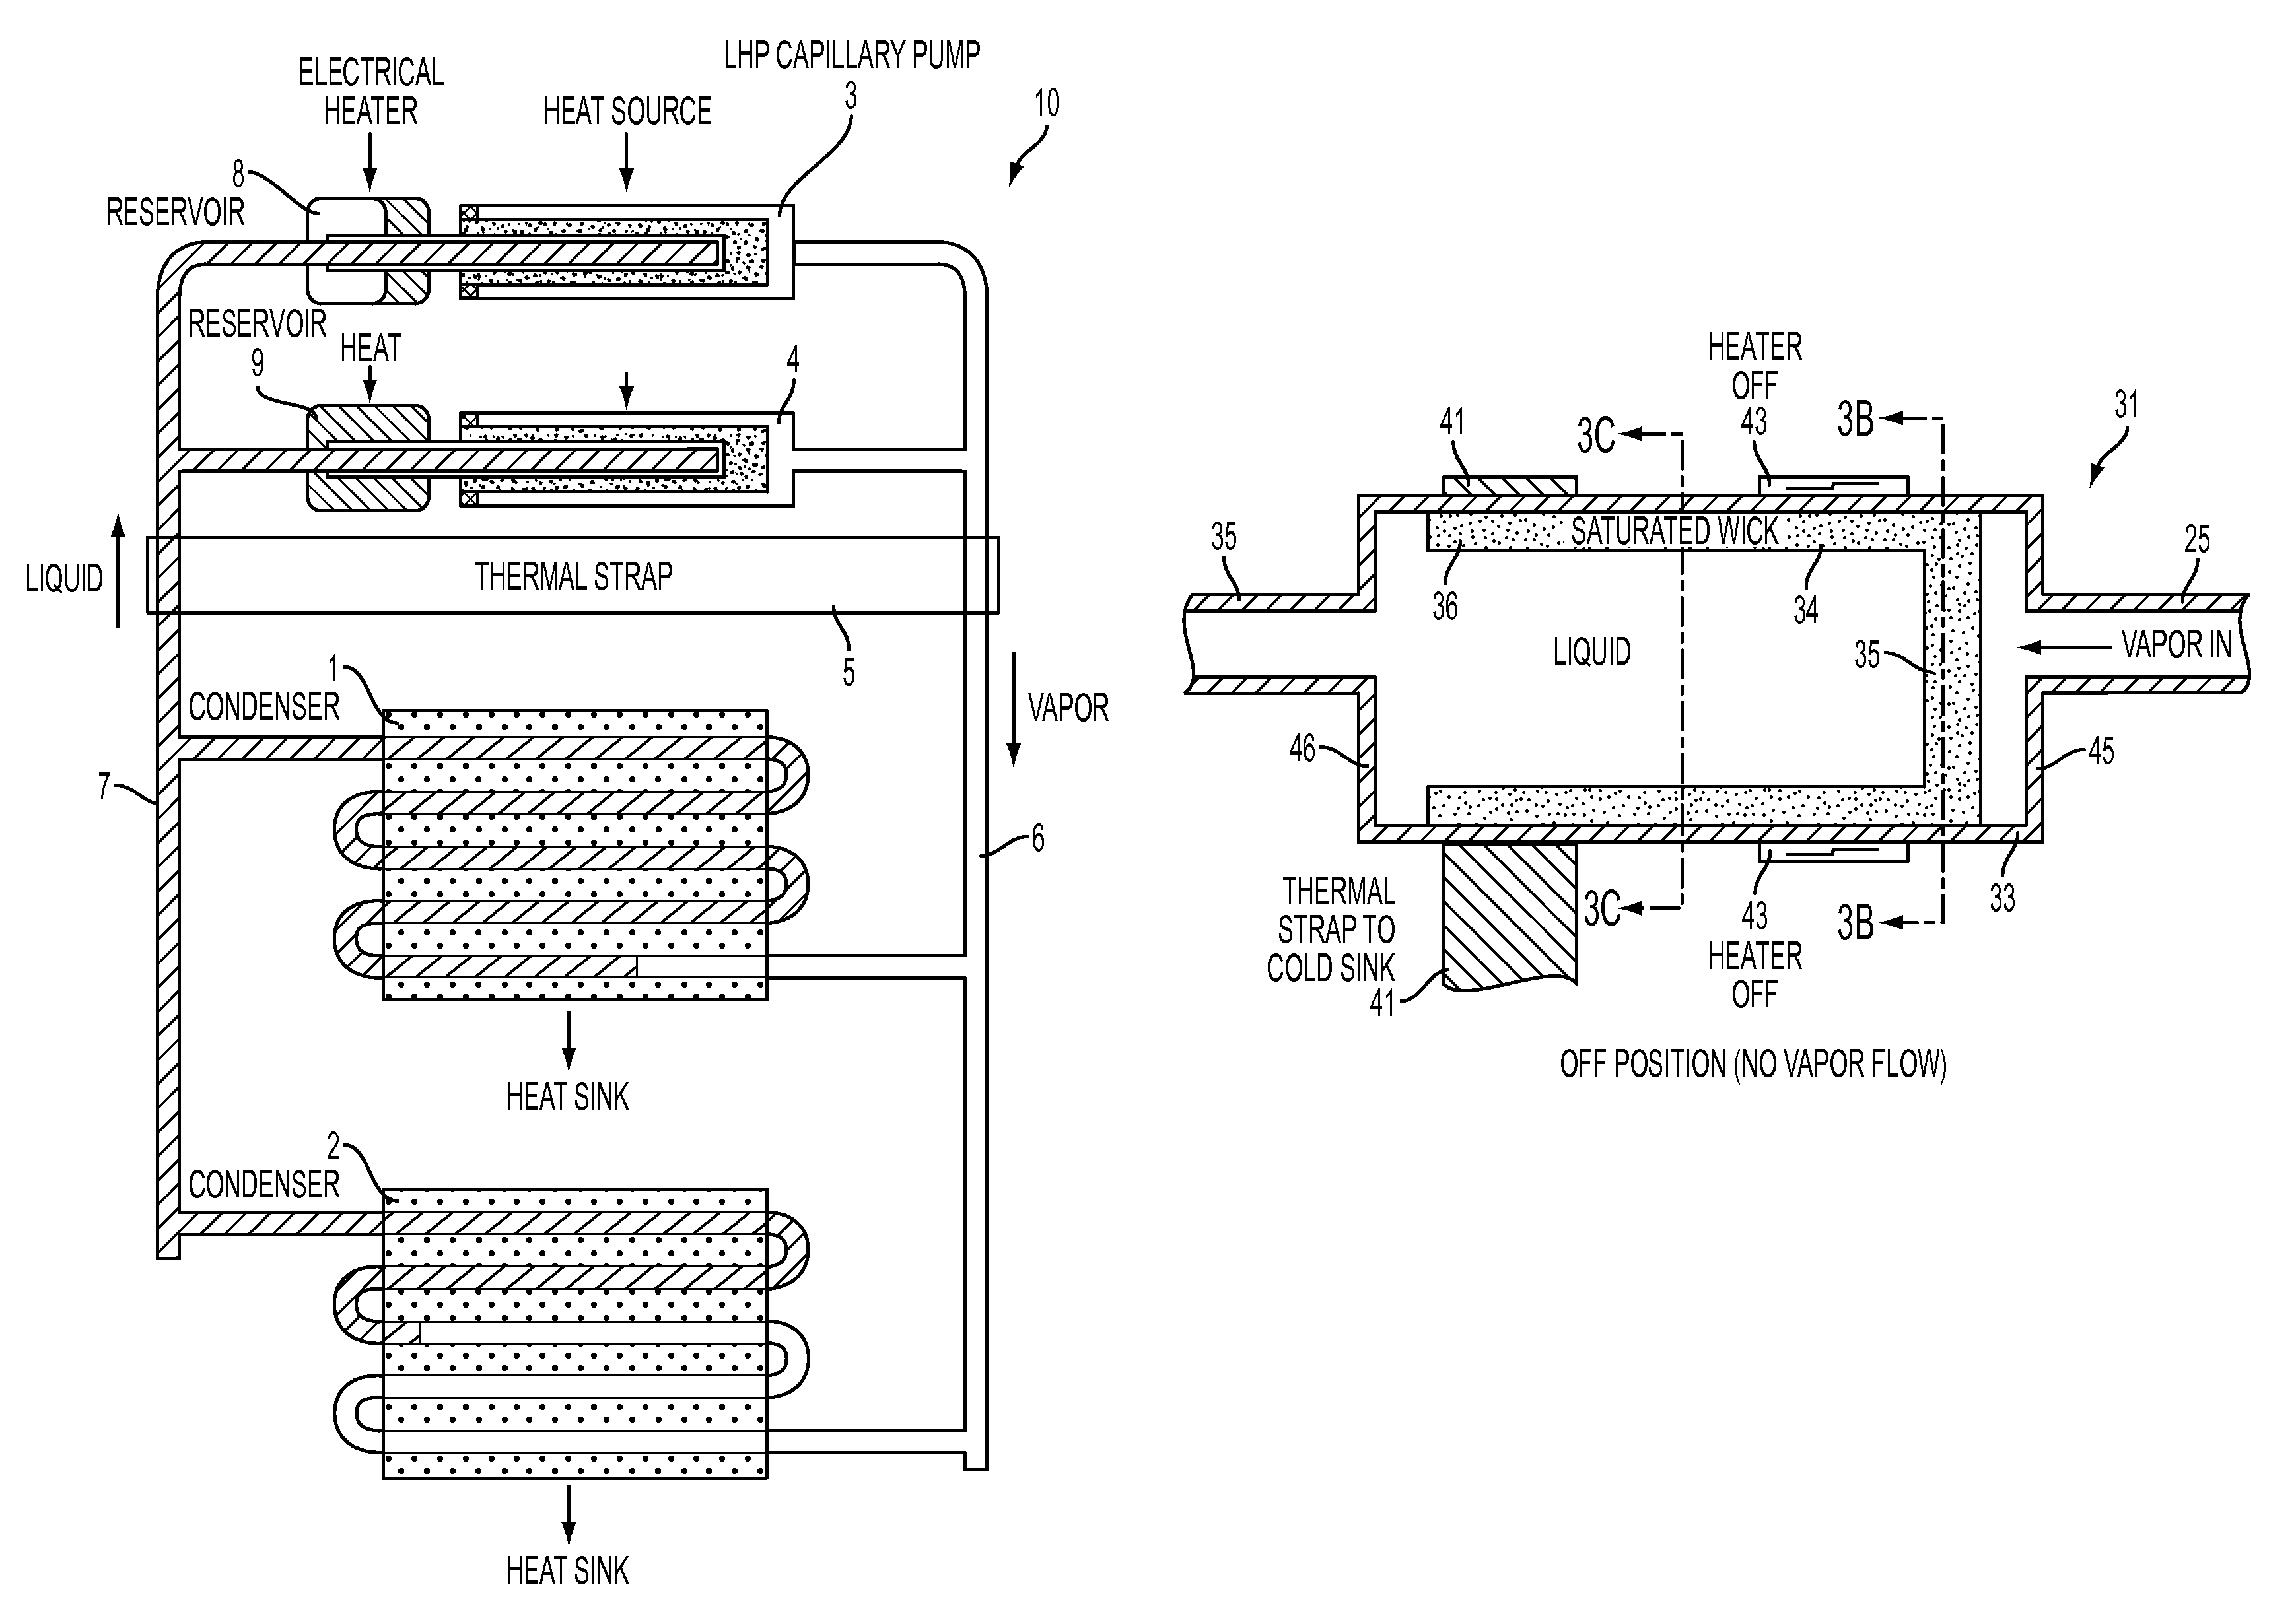 Temperature actuated capillary valve for loop heat pipe system